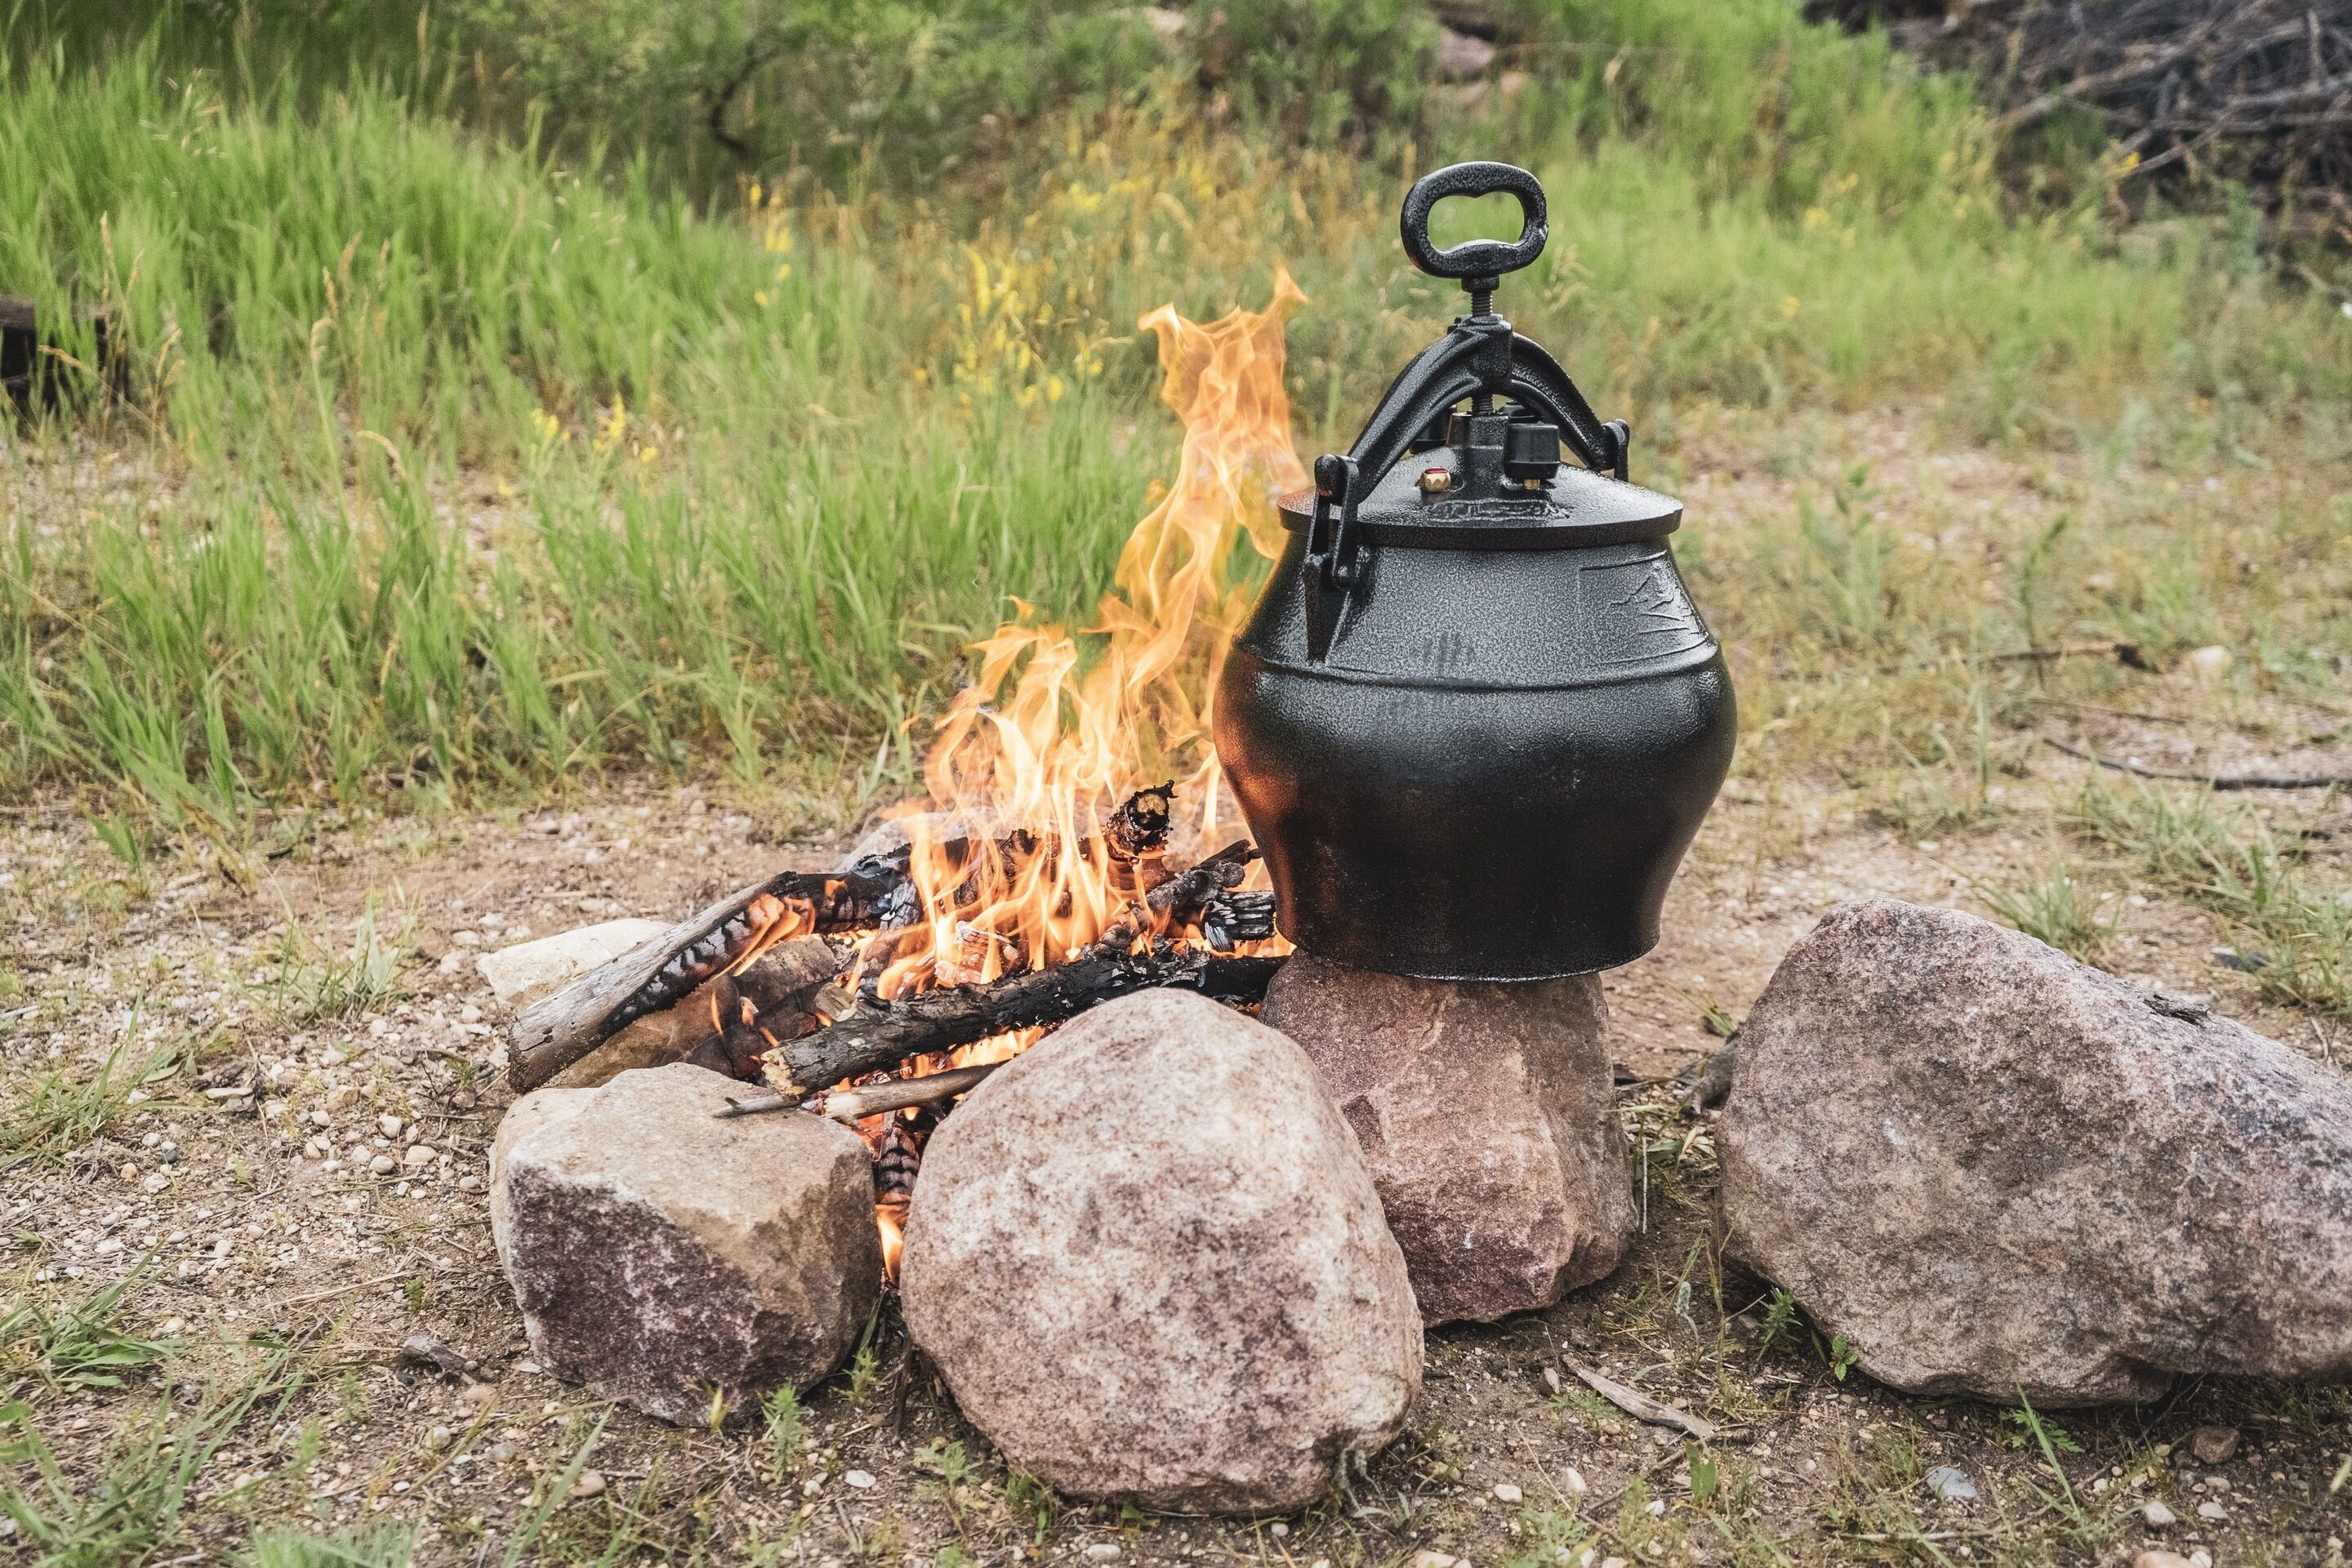 AFGHAN PRESSURE COOKER : Camping / Emergency Prepping | Page 2 | Bushcraft  USA Forums